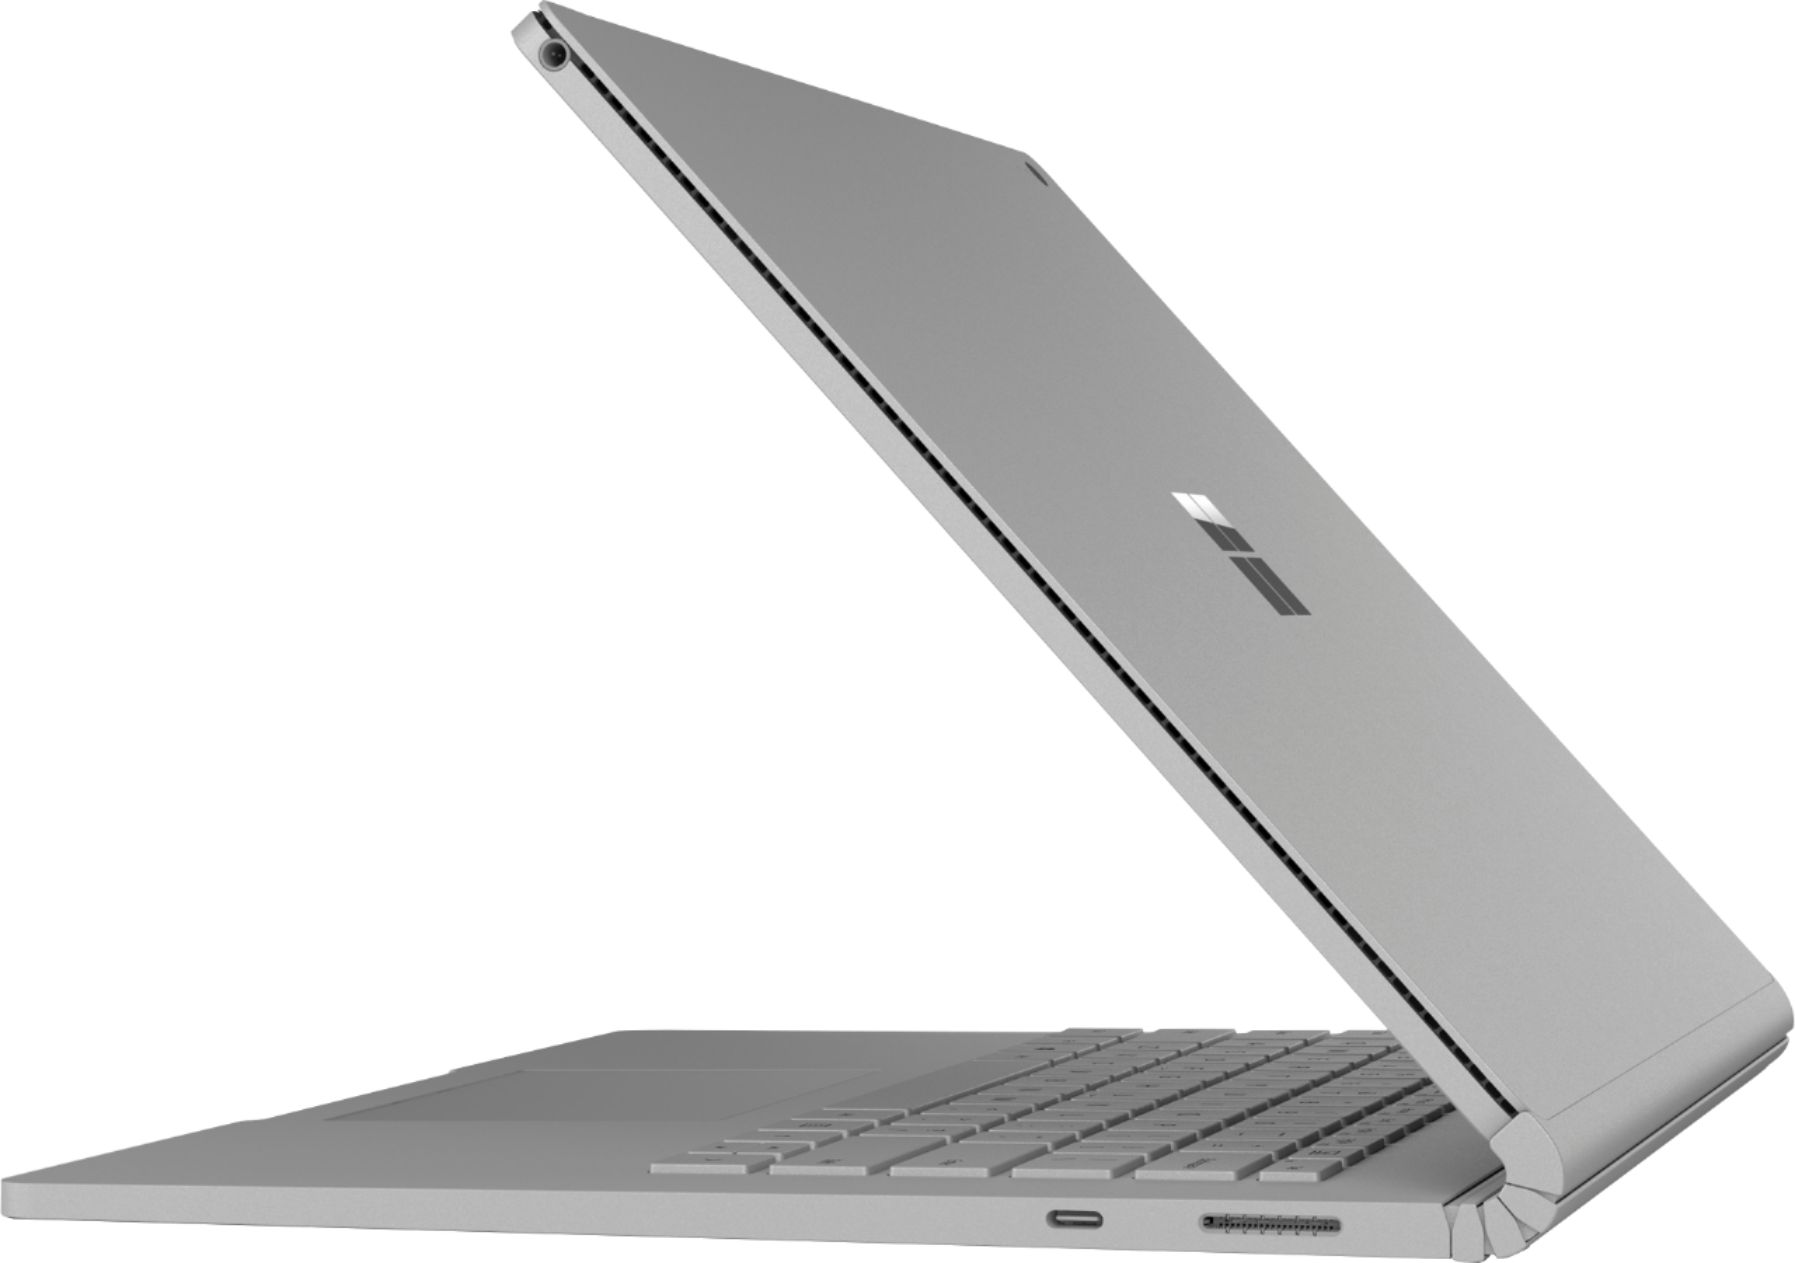 Left View: Microsoft - Surface Laptop 3 - 13.5" Touch-Screen - Intel Core i5 - 8GB Memory - 256GB Solid State Drive - Sandstone